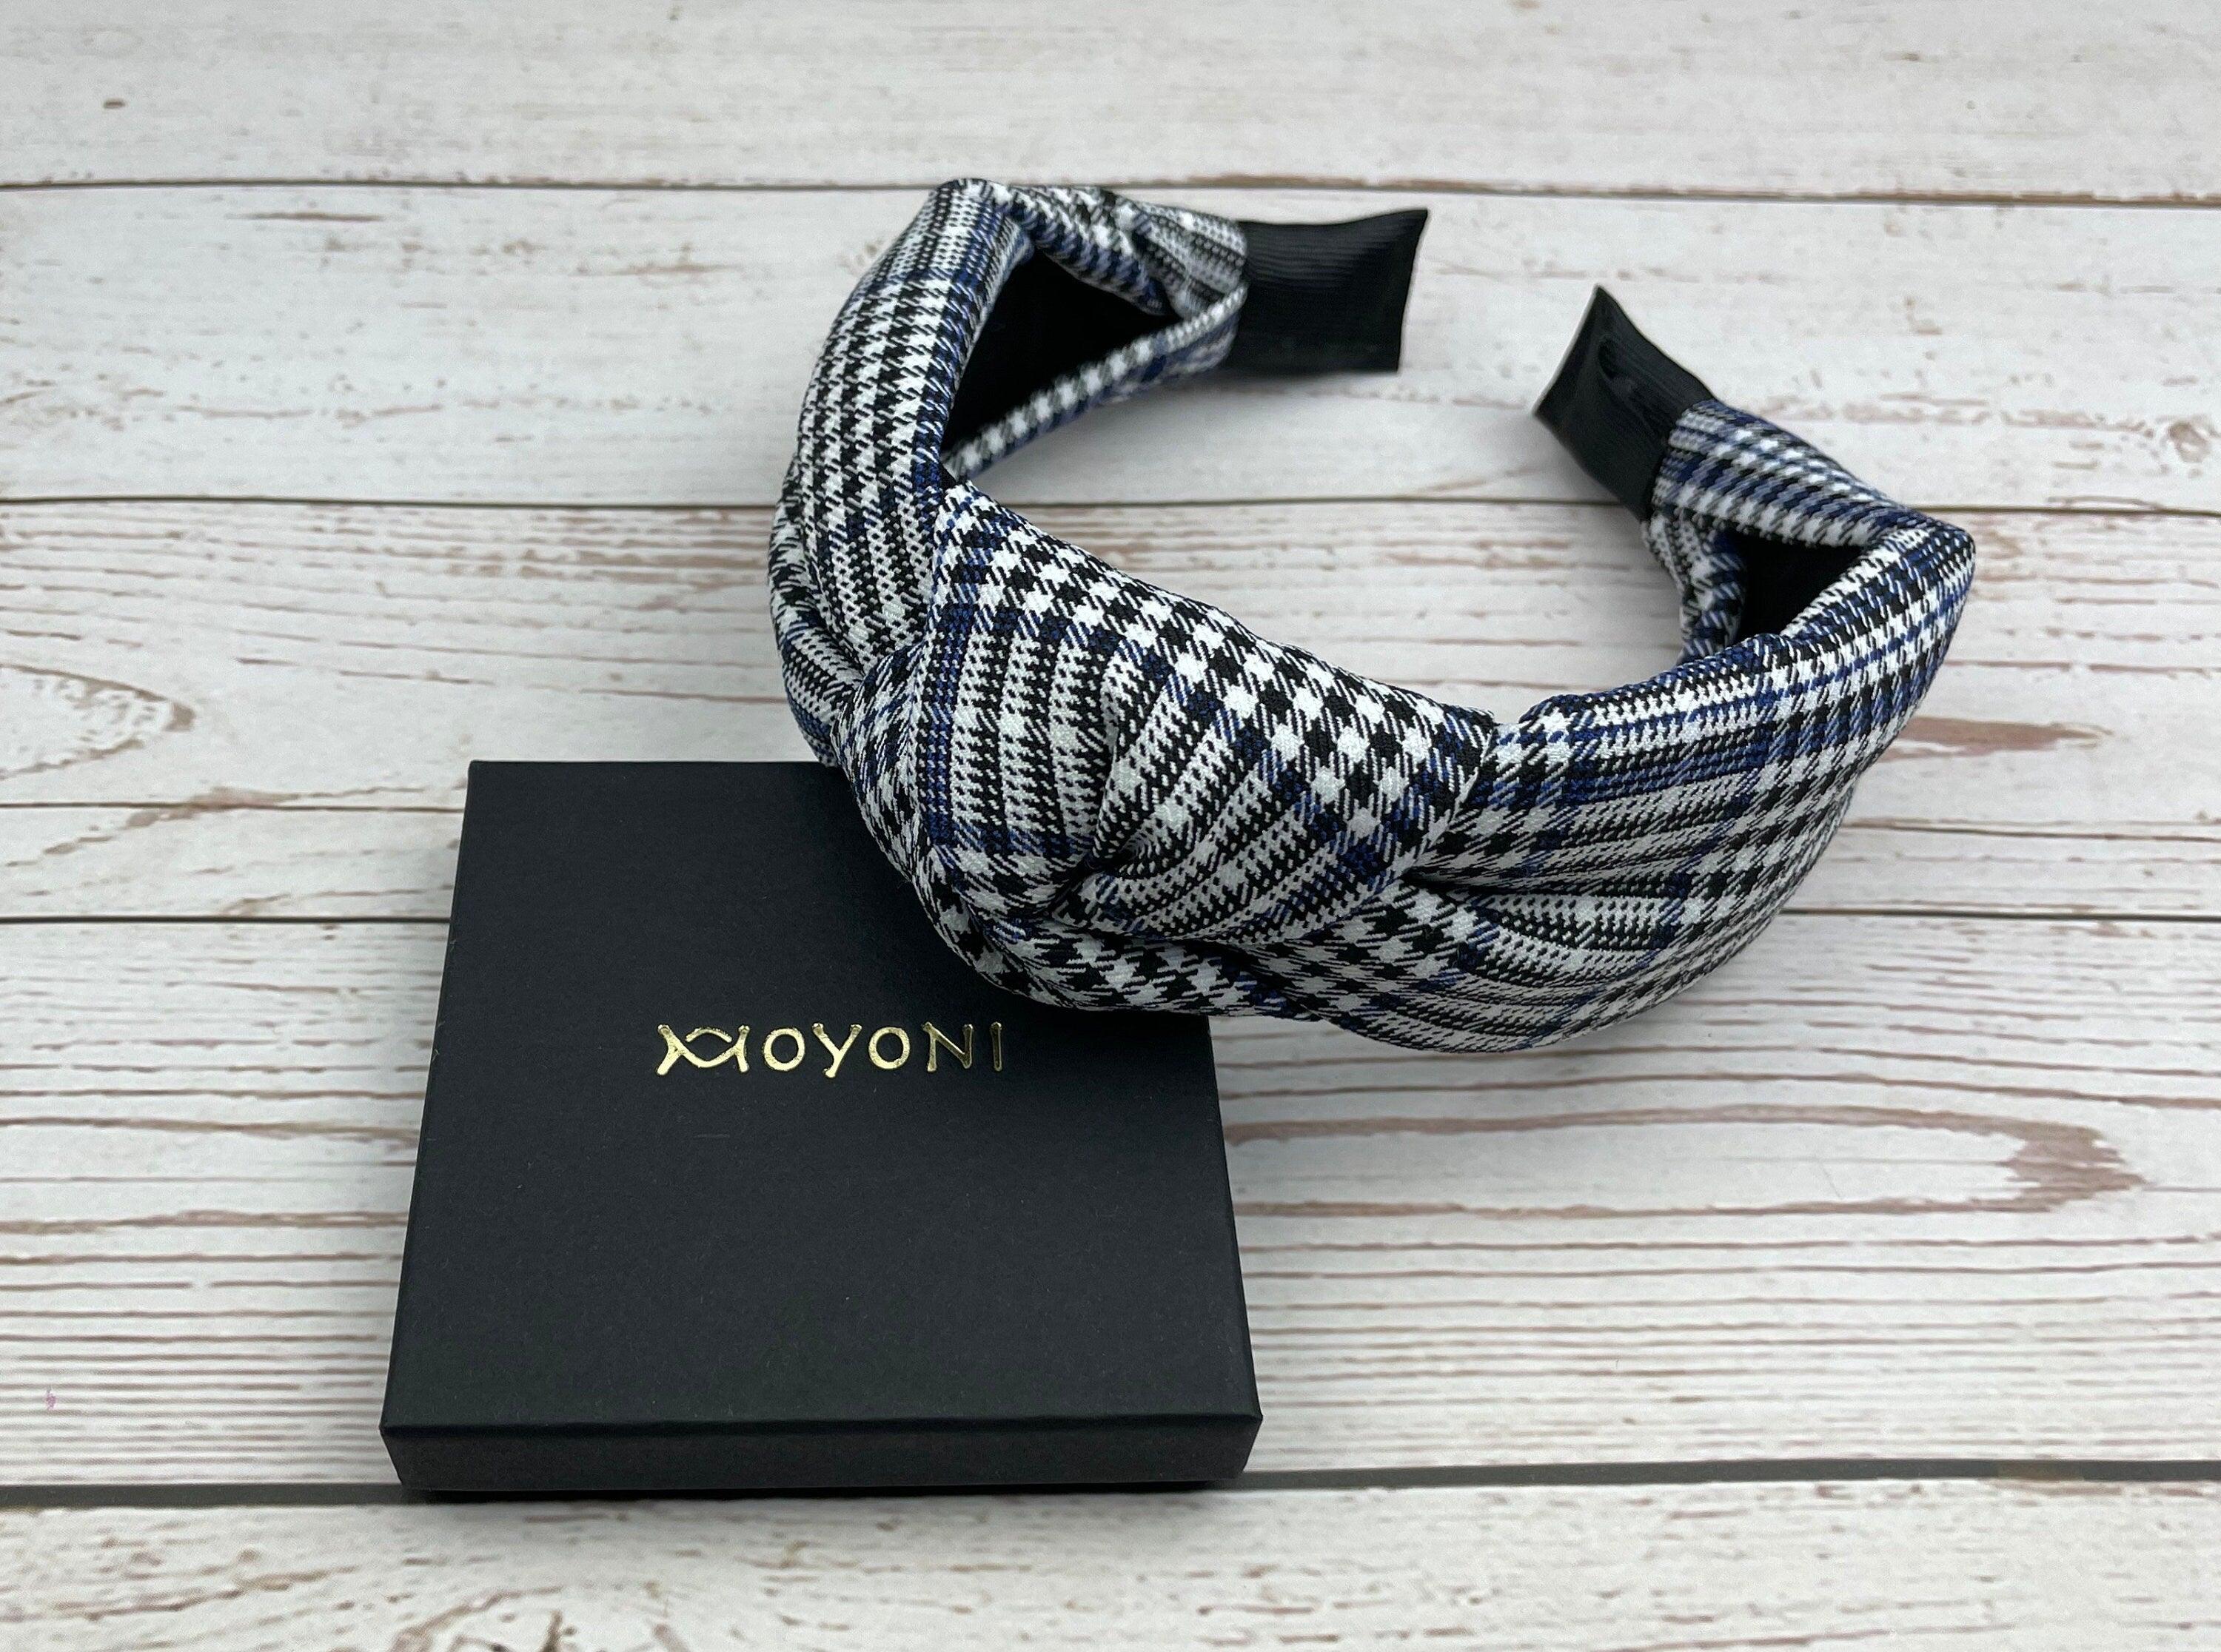 Exquisite Classic Knotted Headband in Crepe White and Black with Dark Blue Stripes - Fashionable Hair Accessory for Women, Perfect for College available at Moyoni Design